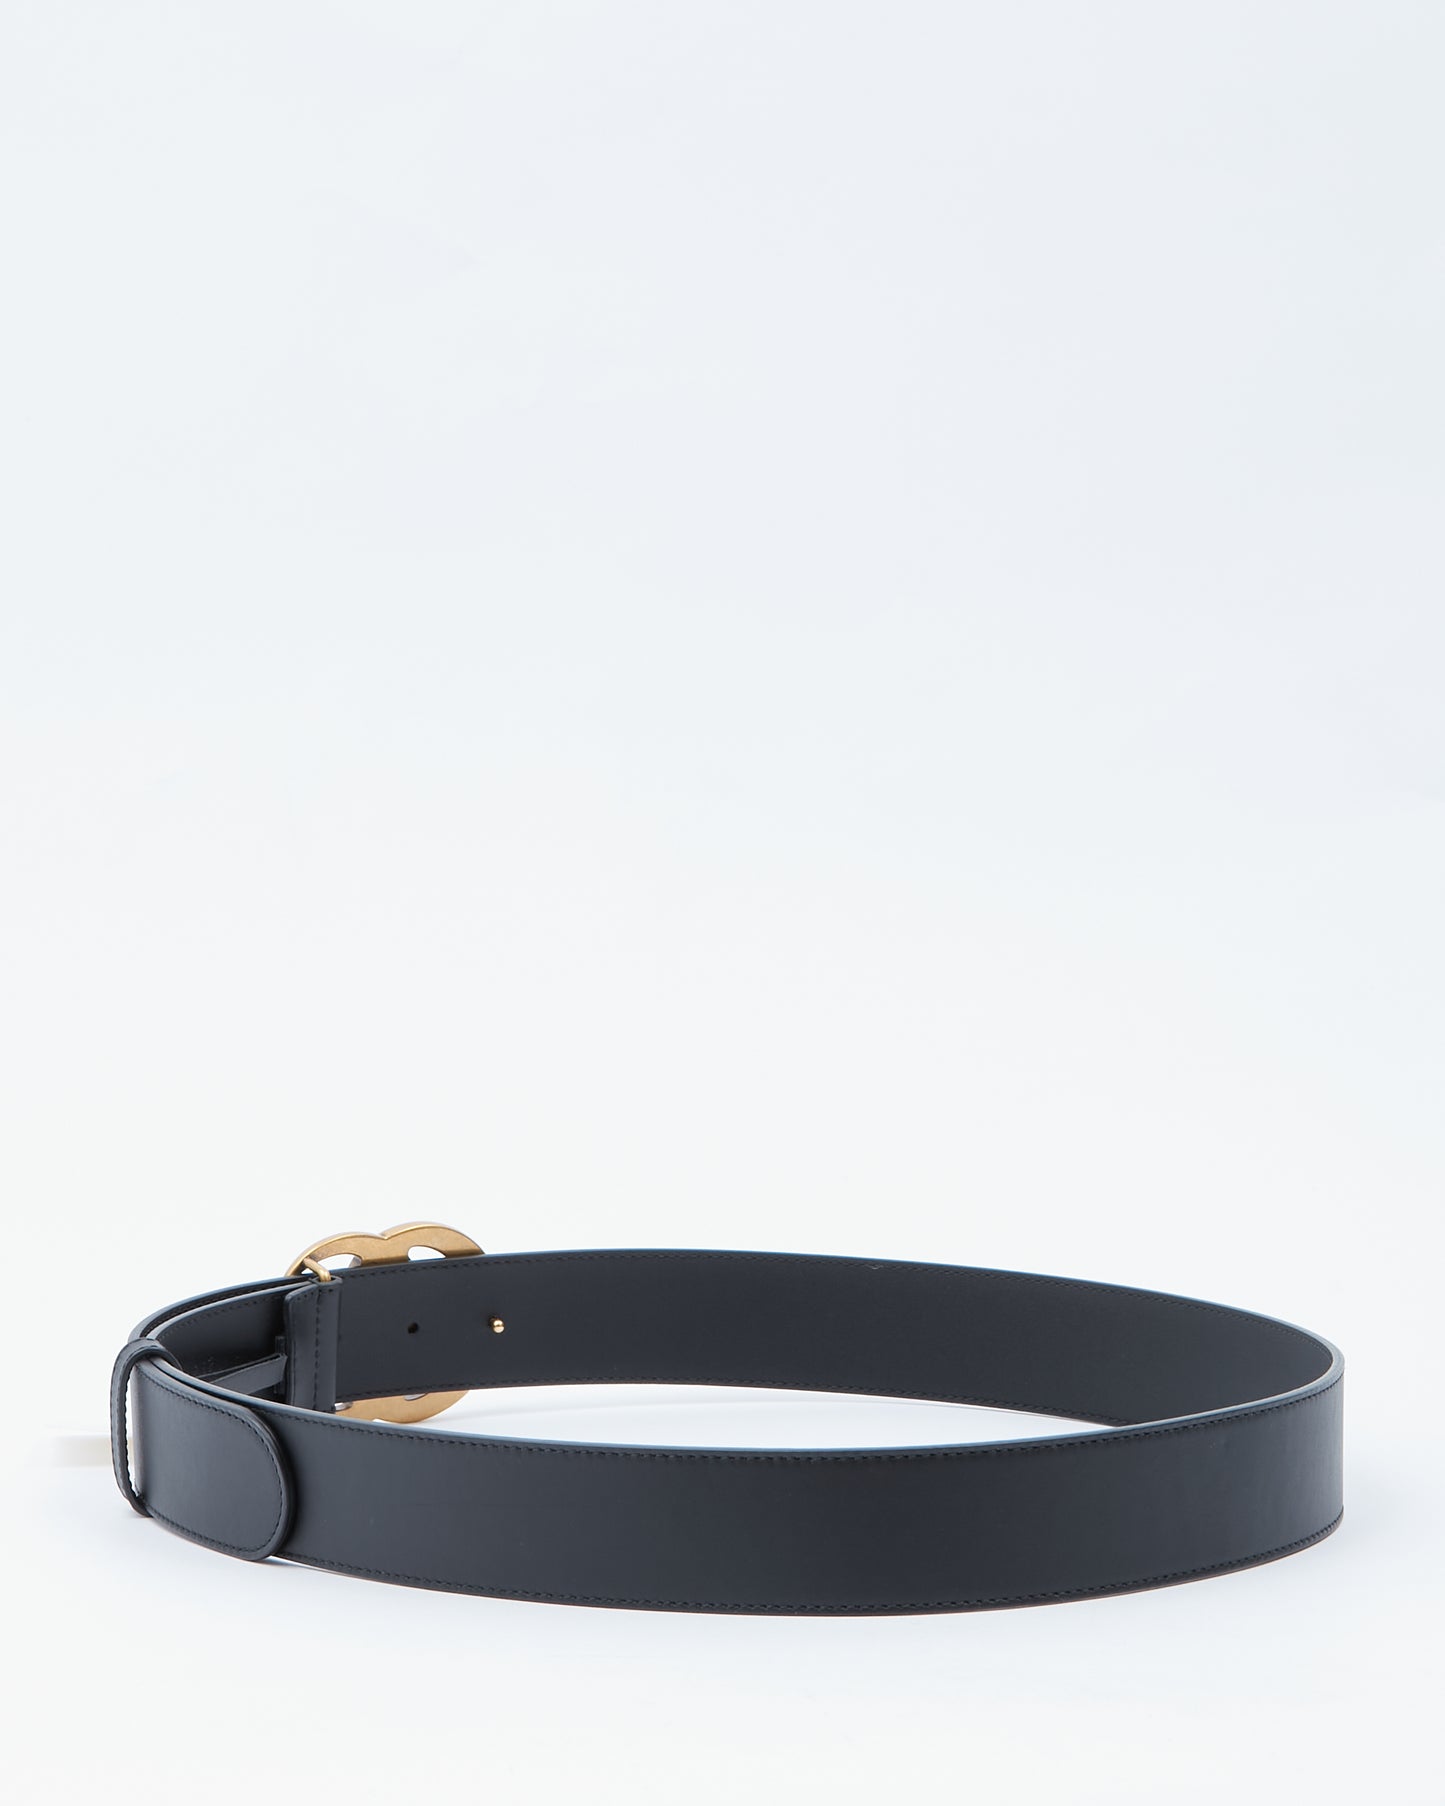 Gucci Black Leather Marmont Double GG Wide Belt - 95/38